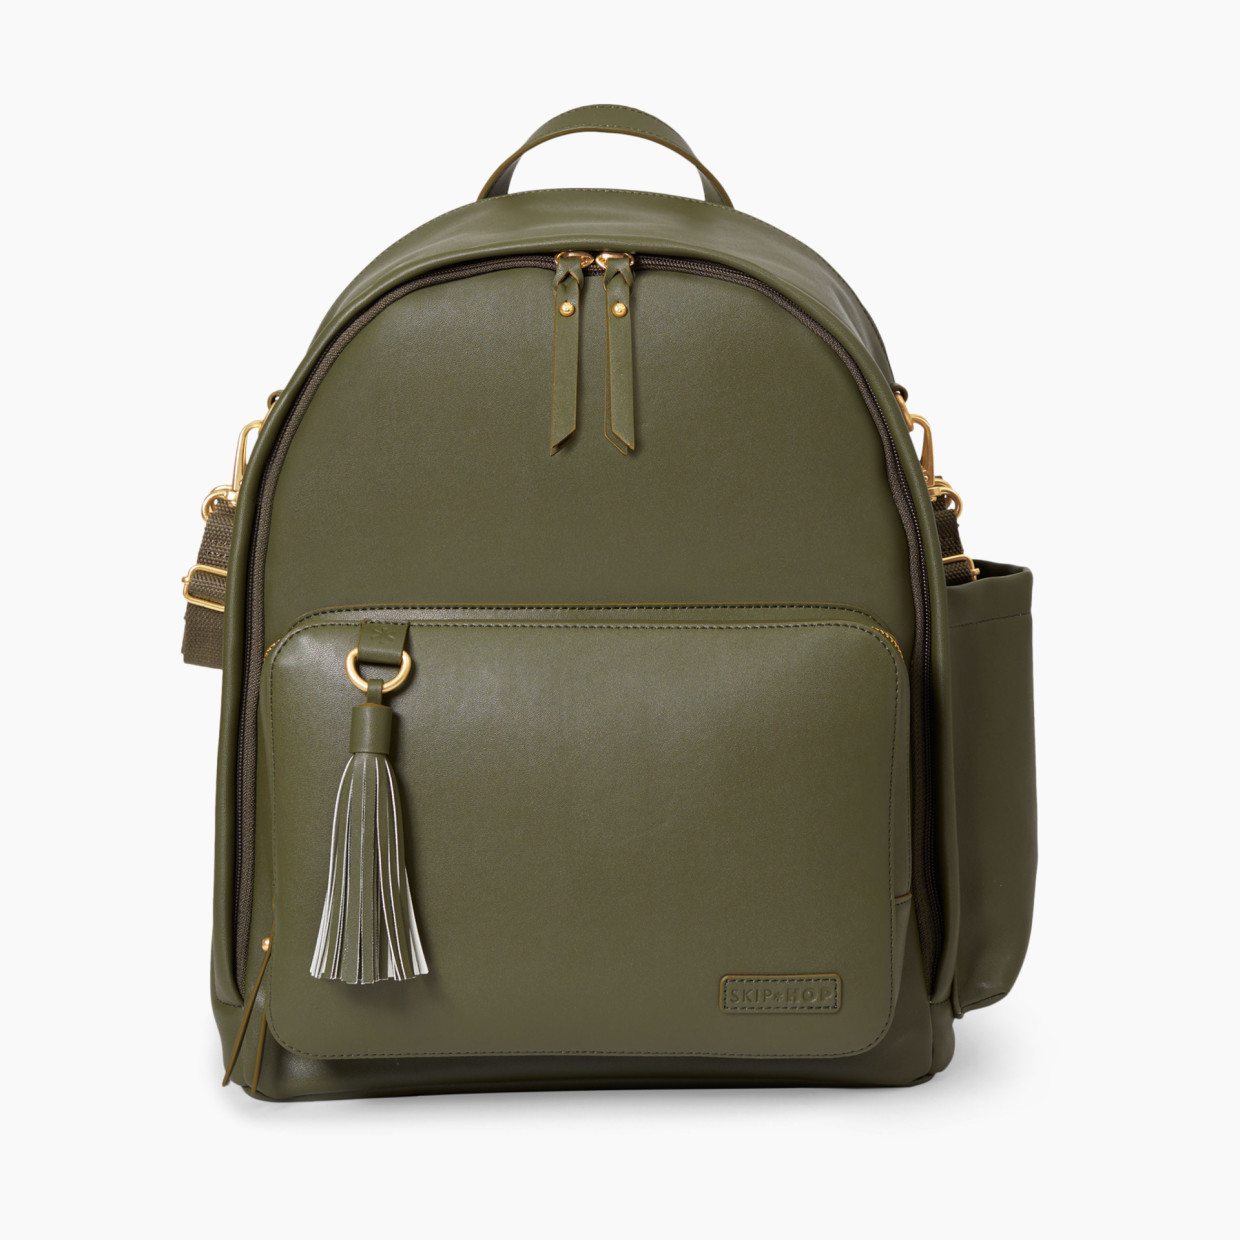 Skip Hop Greenwich Simply Chic Diaper Backpack - Olive.